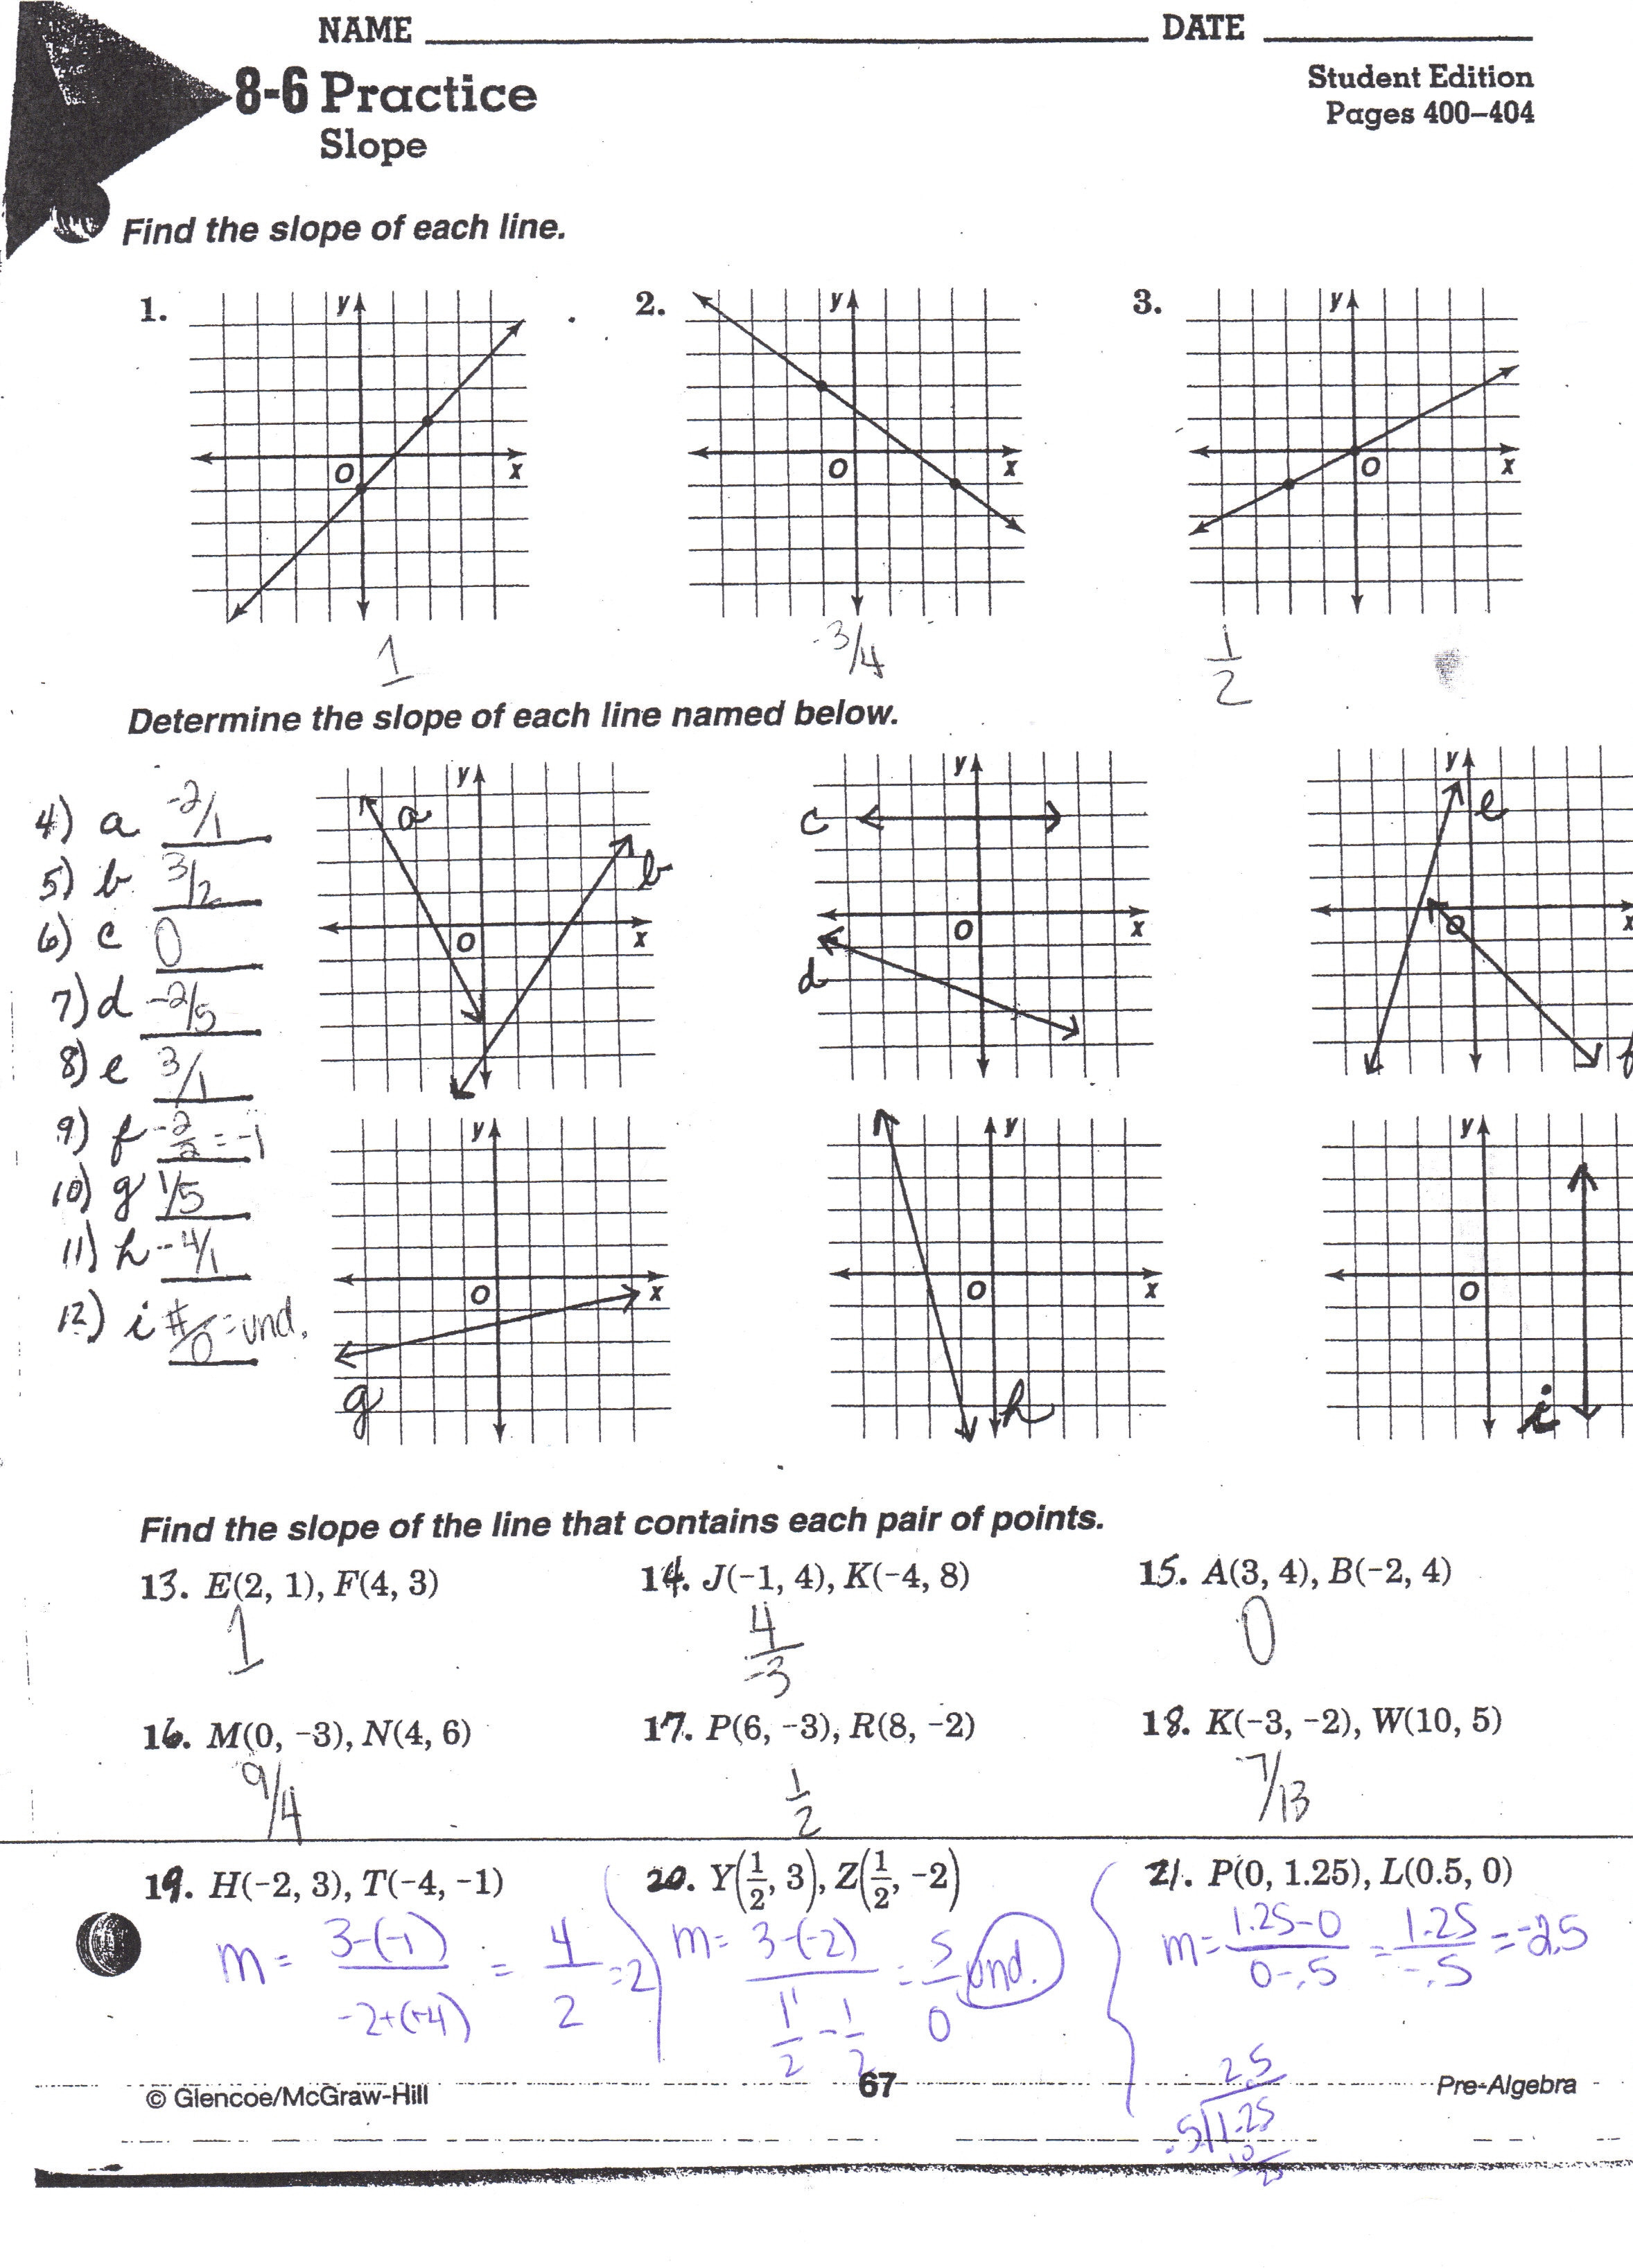 equations-of-lines-worksheet-answer-key-db-excel